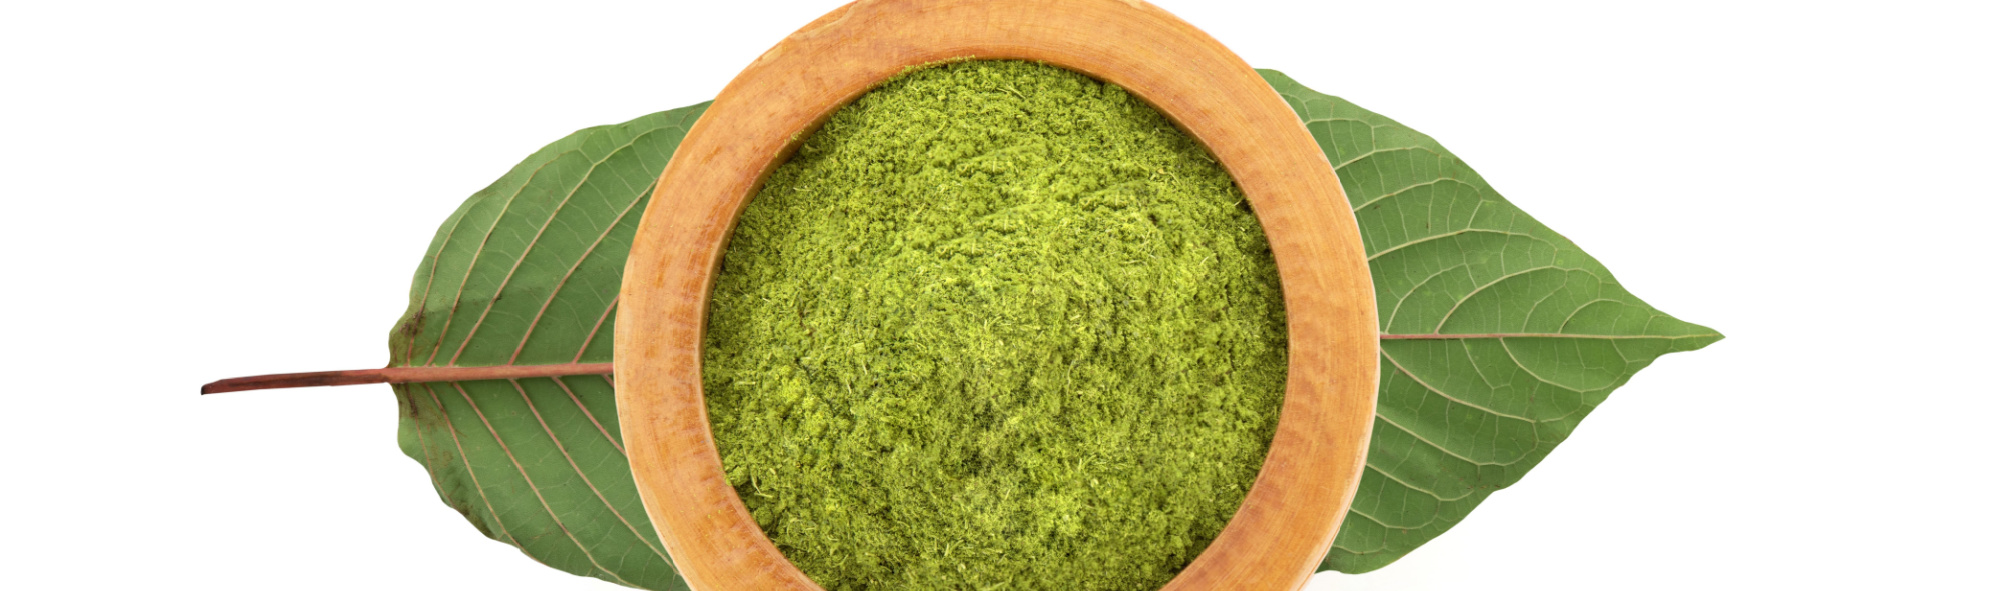 Get Your Dosage Right: How Much Is a Gram of Kratom?